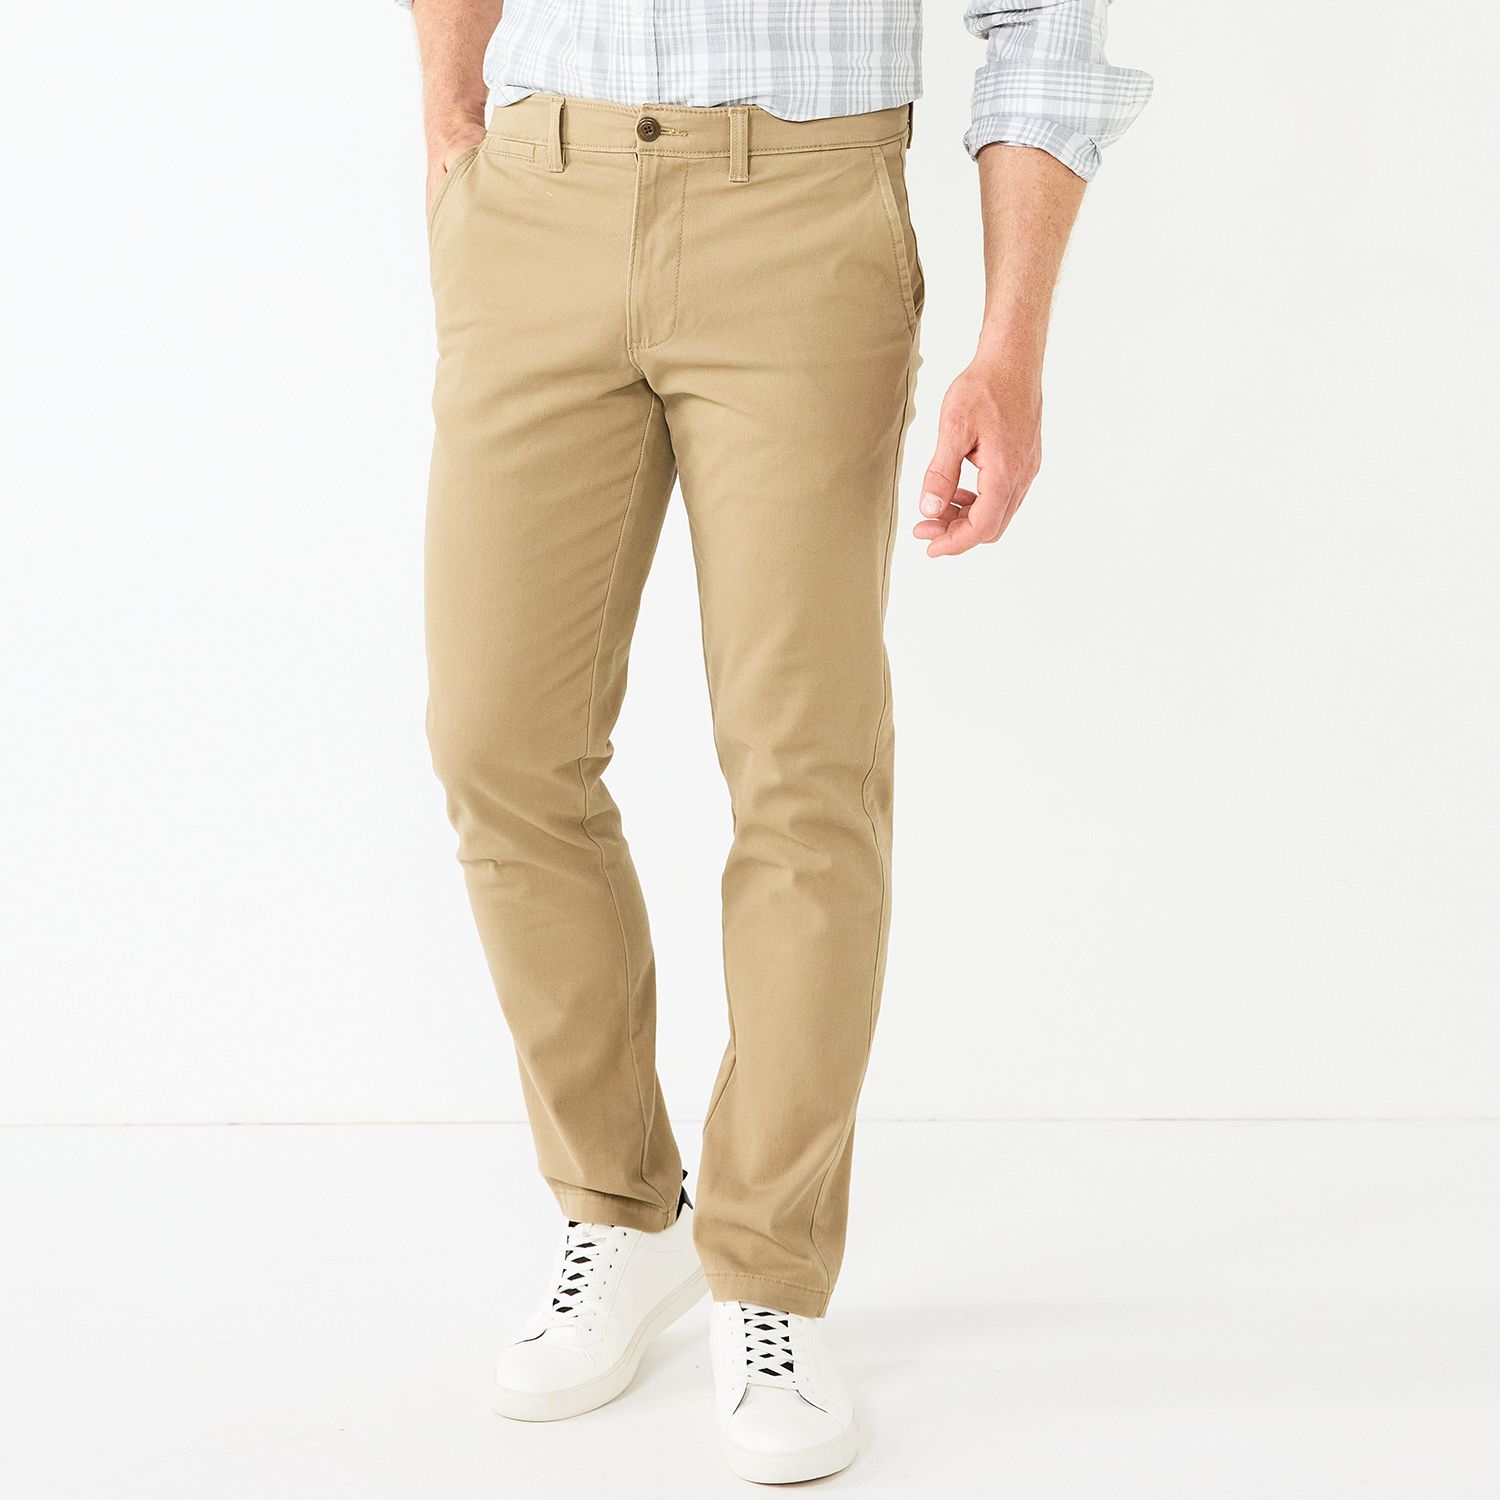 classic fit chino pants